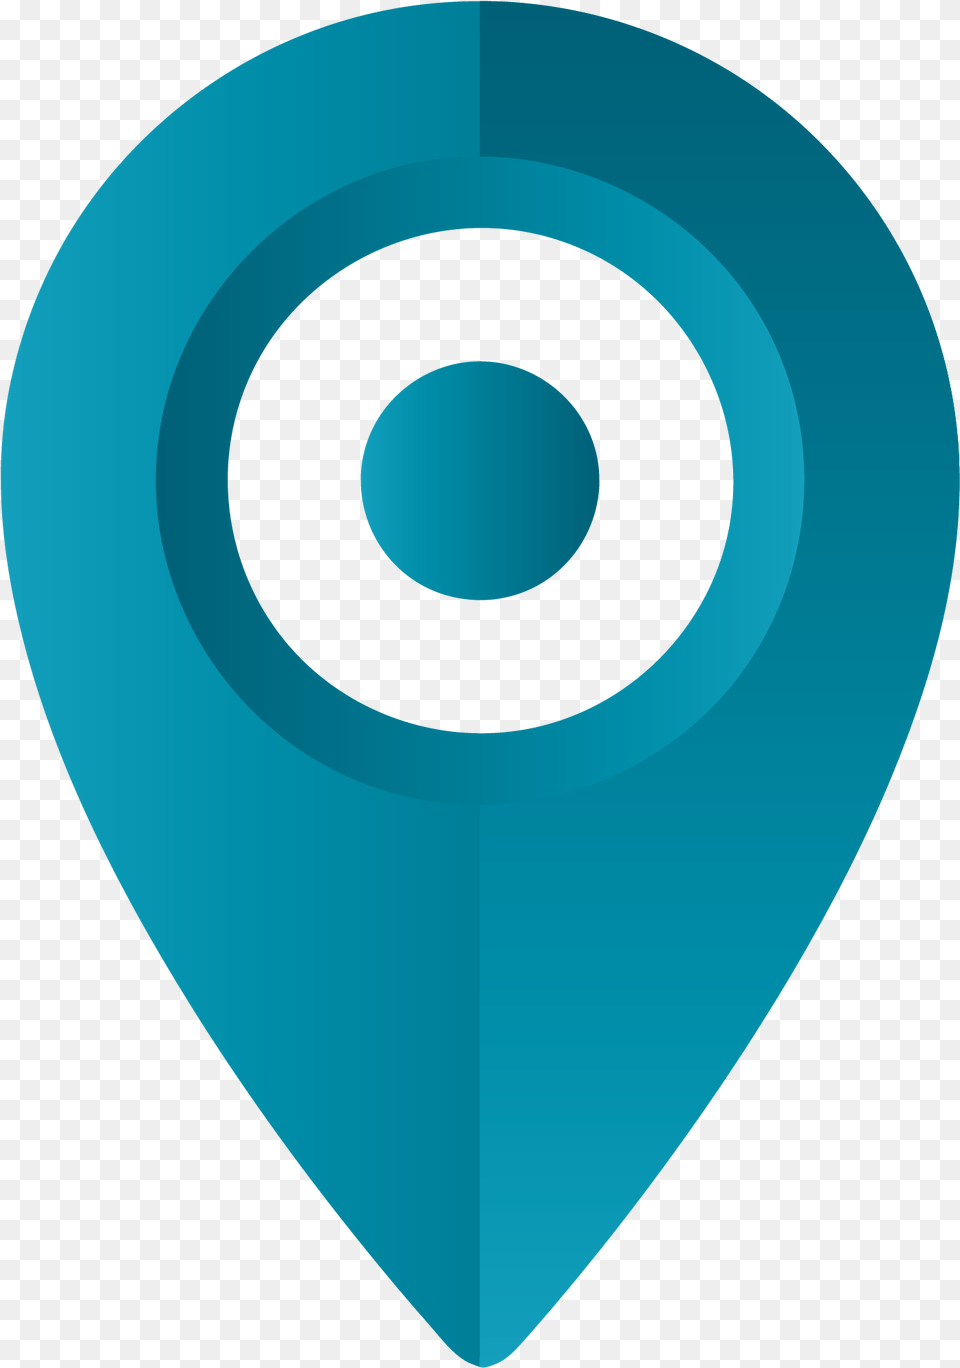 Map Location Icon Postpartum Resource Center Of New York Google Maps Icon Blau, Guitar, Musical Instrument, Plectrum, Disk Png